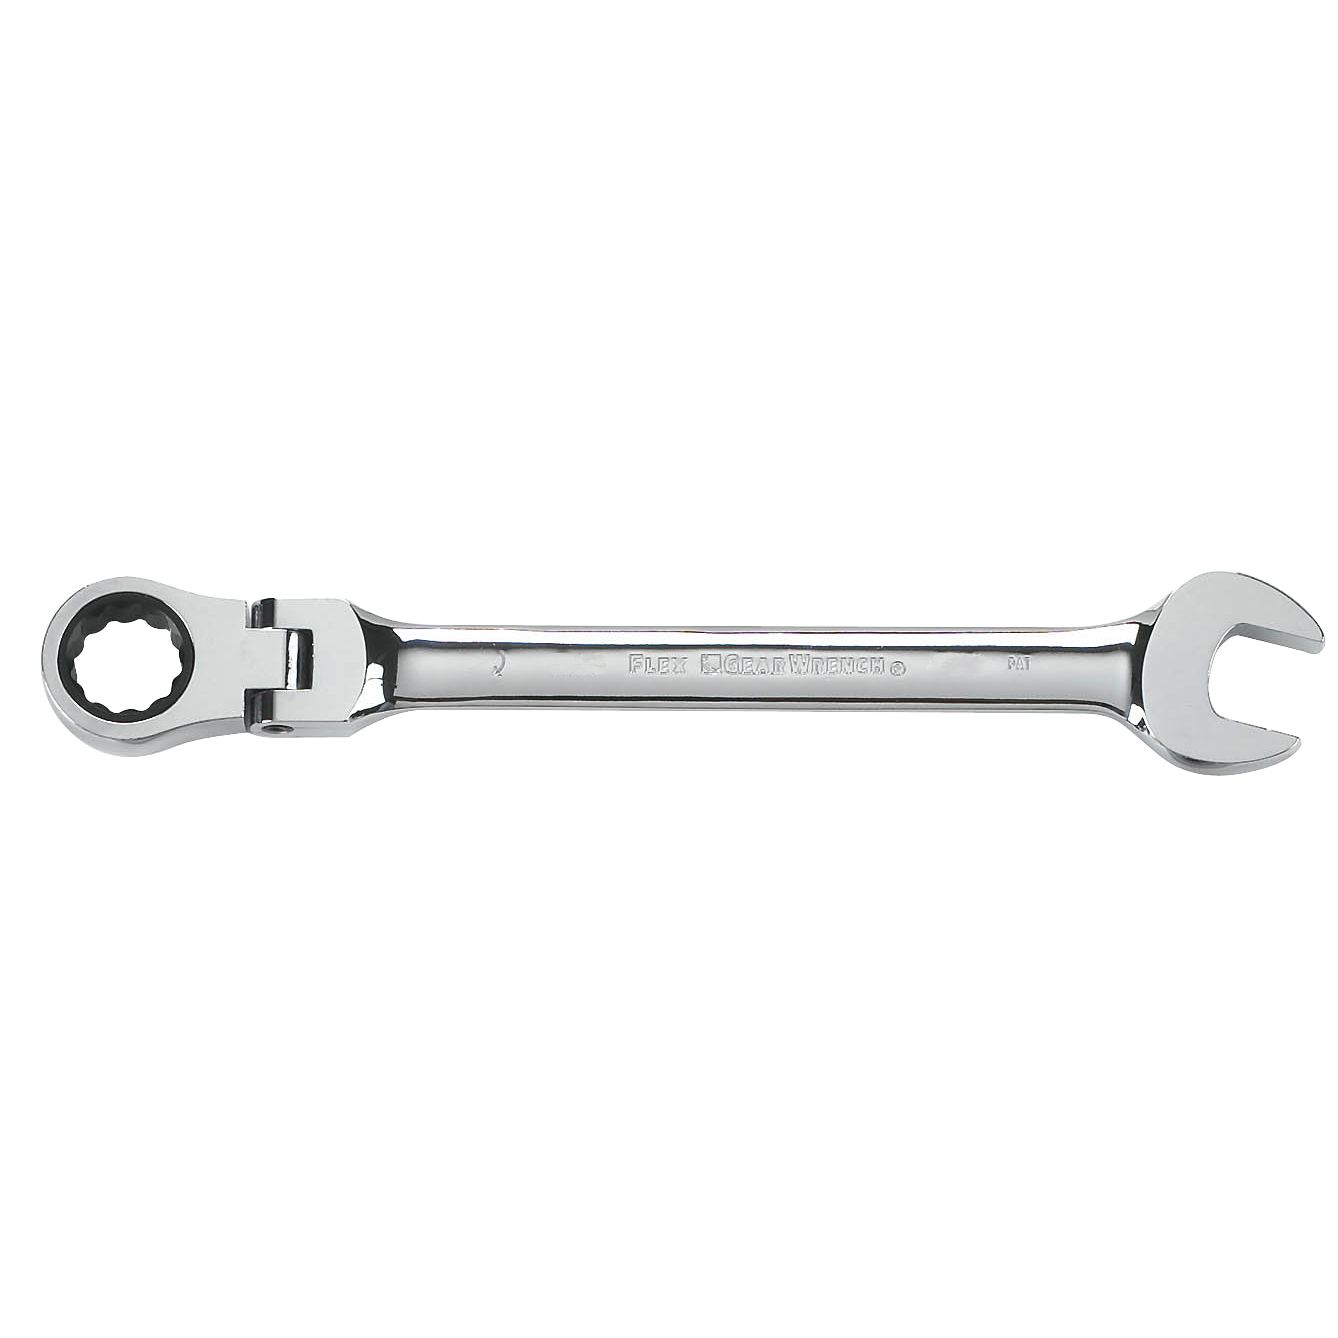 GearWrench 13mm Full Polish Flex Ratcheting Combination Wrench